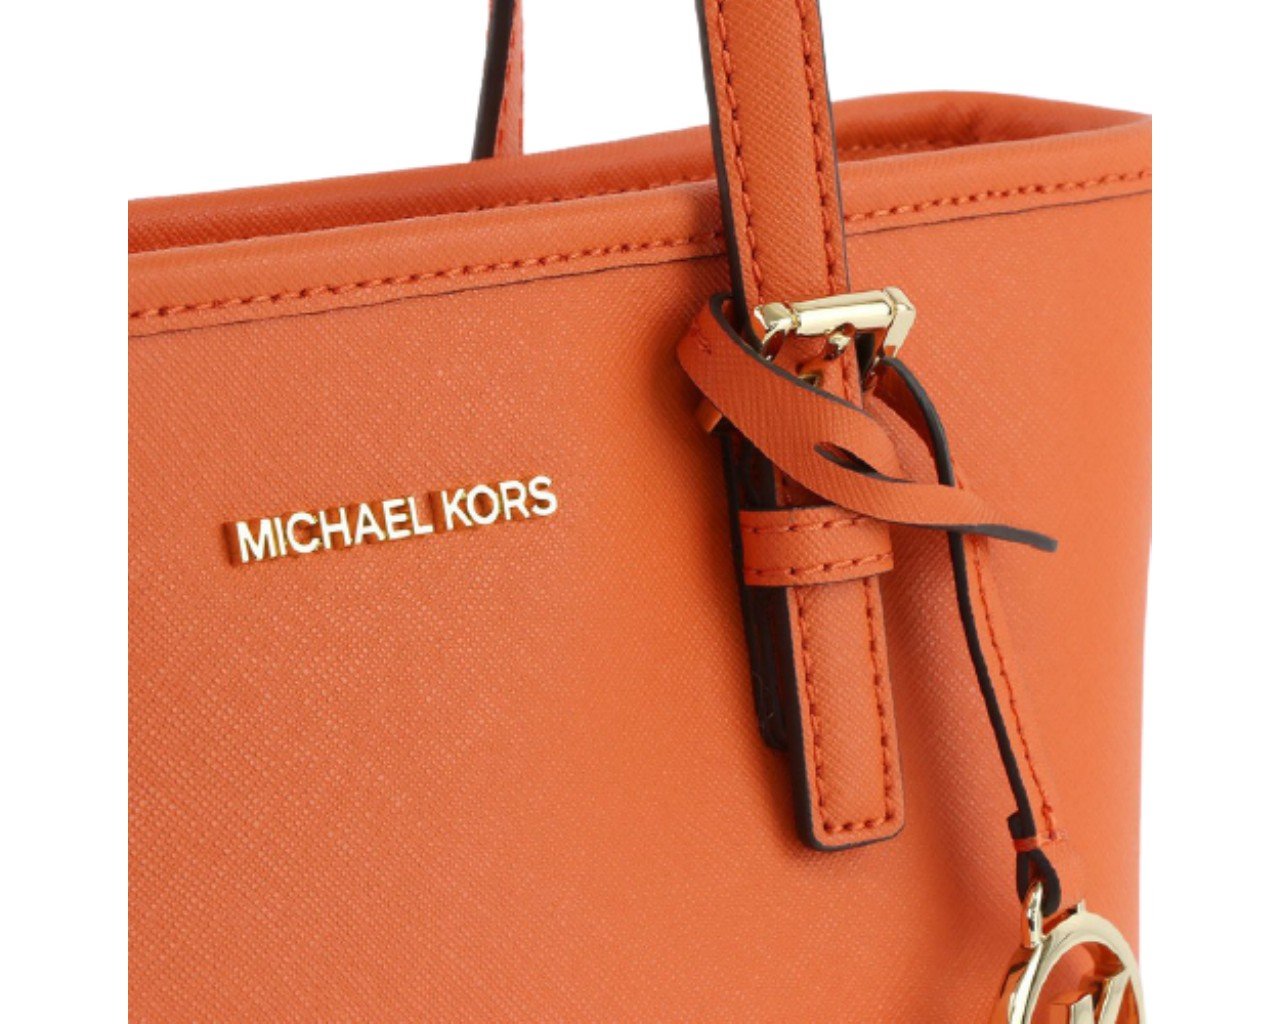 Michael Kors Jet Set Travel X Small Carryall Convertible Top Zip Tote  Made of Saffiano leather; Zip top for closure; 1 inside zip pocket; 1 inside open pocket;  Double leather handles of 12 cm drop; Long adjustable strap of 51-61 cm drop;  Gold hardware; Comes with original tags.     Measurements: Length: 28 x Height: 20 x Width: 13 cm.